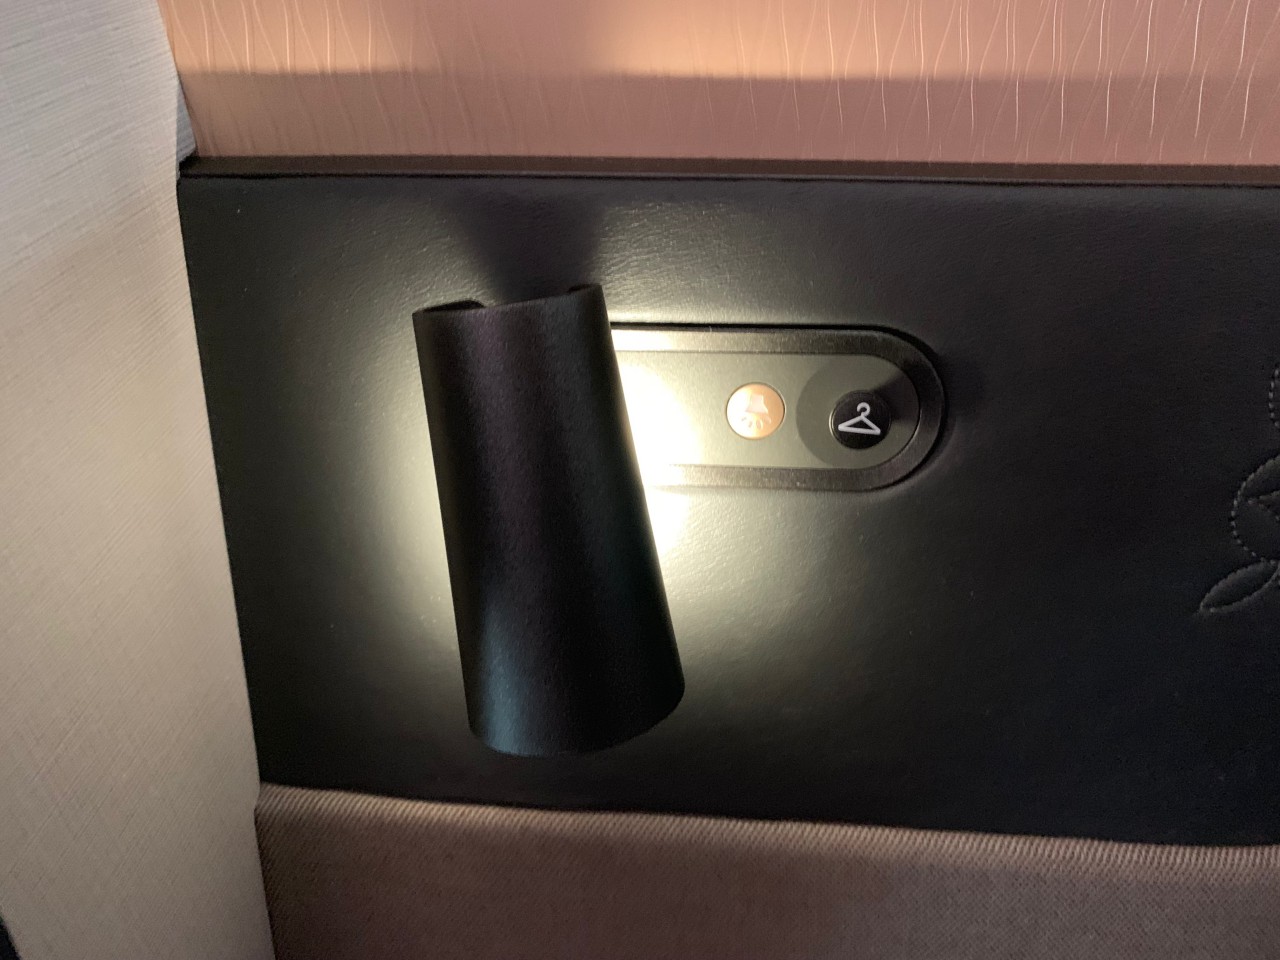 Qatar Qsuites Review 777: Reading Light and Coat Hook